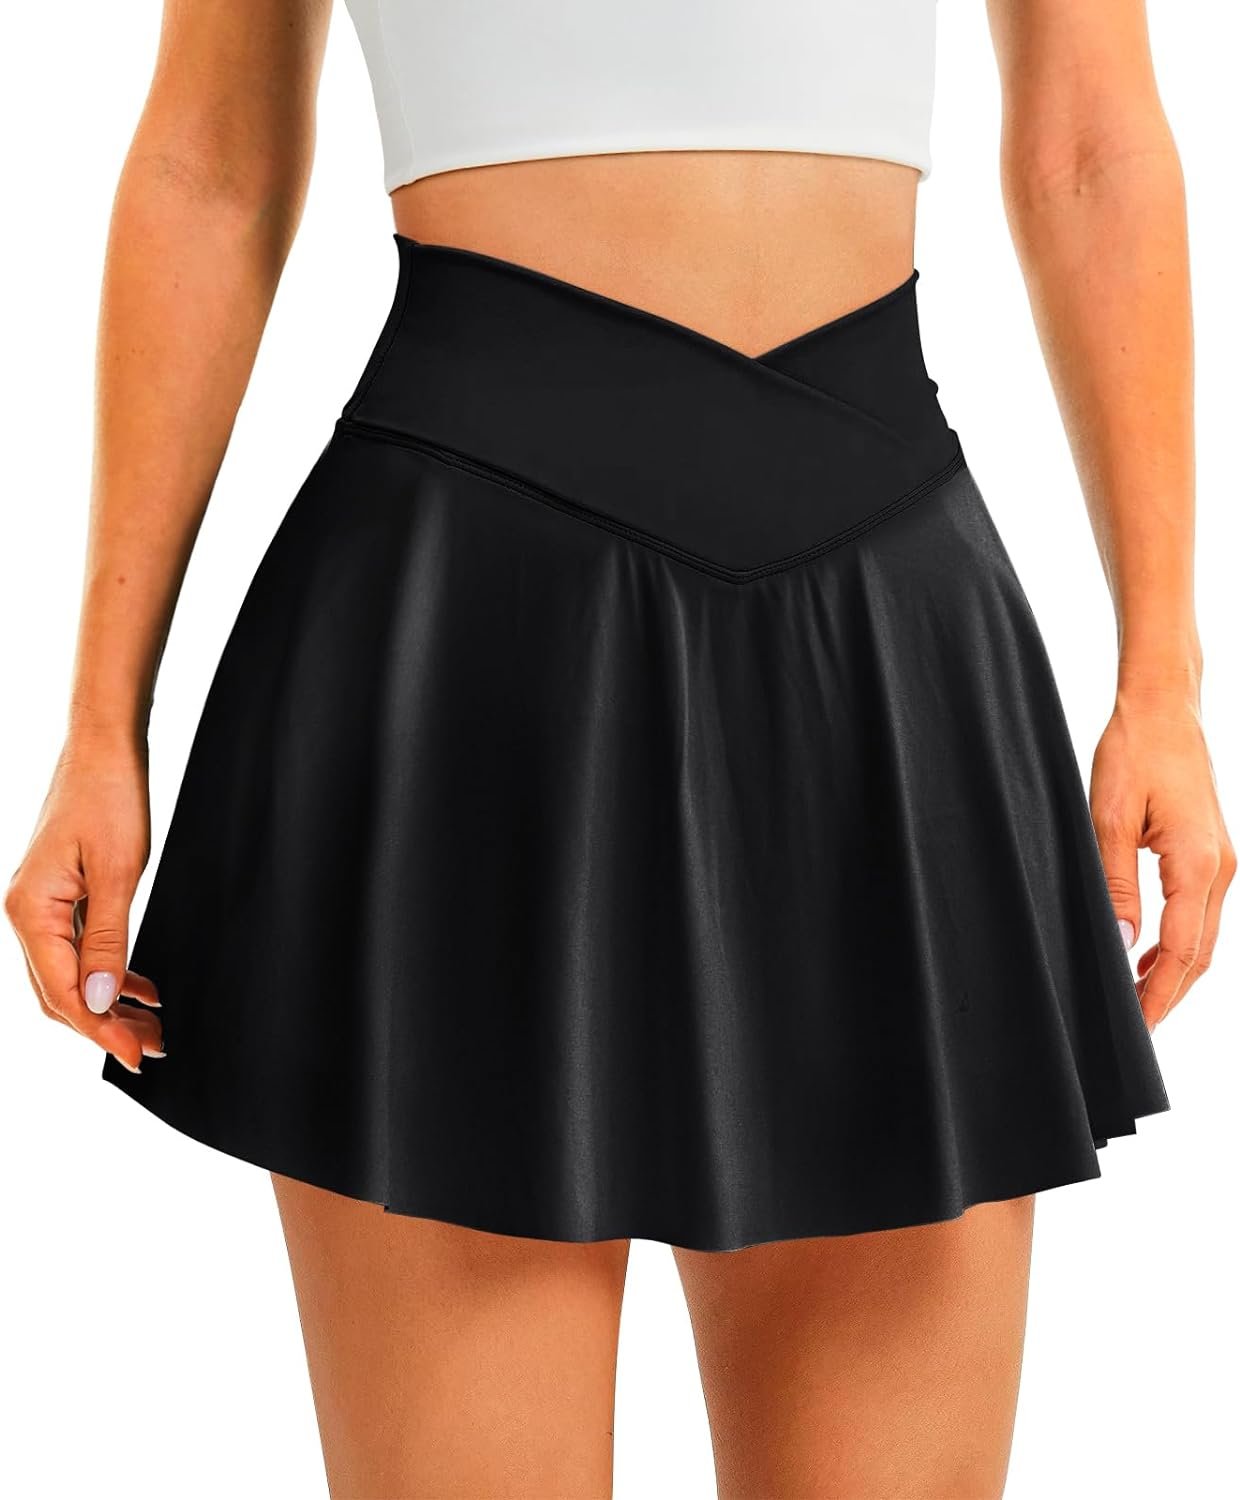 Womens Tennis Skirt with Pockets Shorts Crossover High Waisted Athletic Skorts Skirts for Golf Running Workout